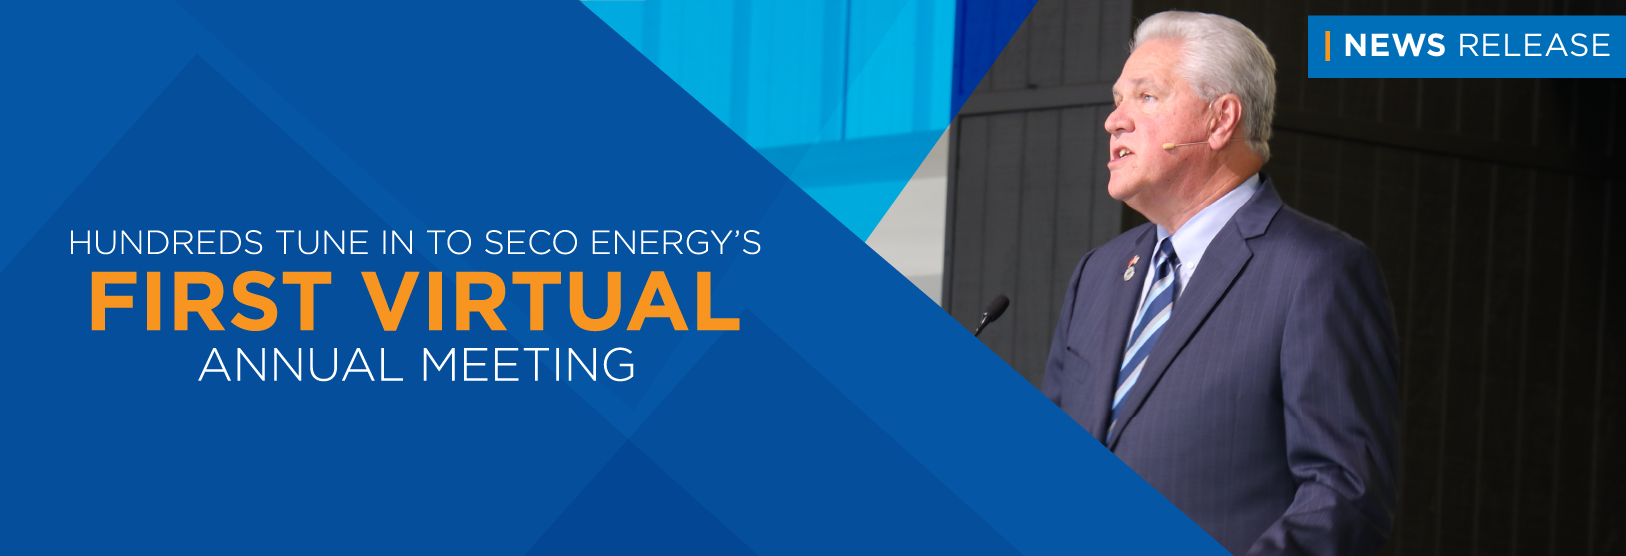 Hundreds tune in to SECO Energy’s First Virtual Annual Meeting